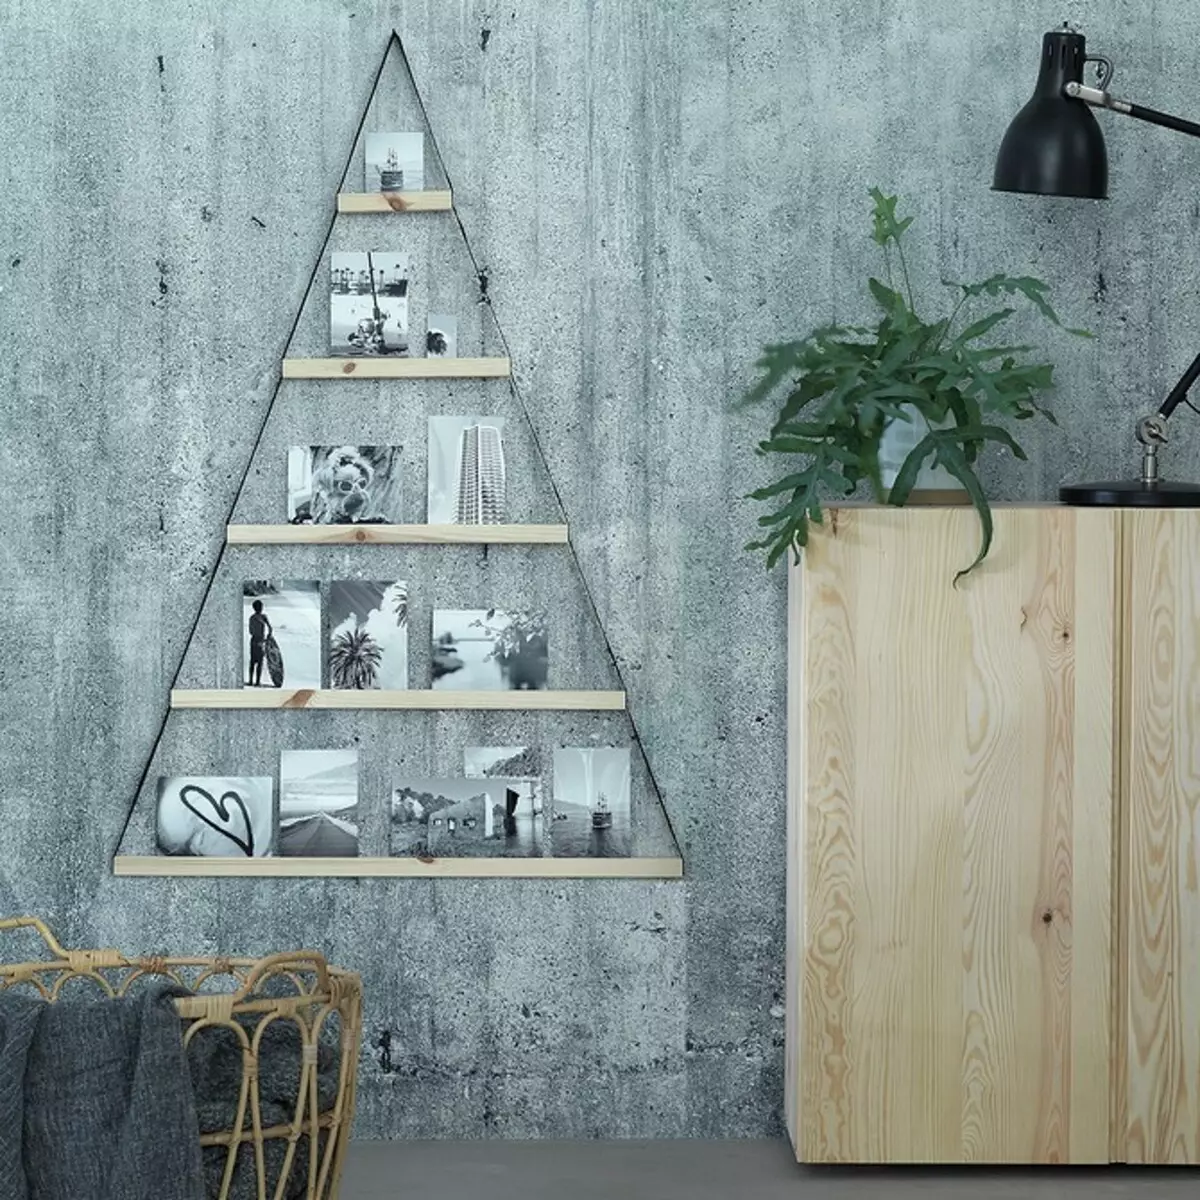 You can choose: 9 Christmas decorations from IKEA 1312_18